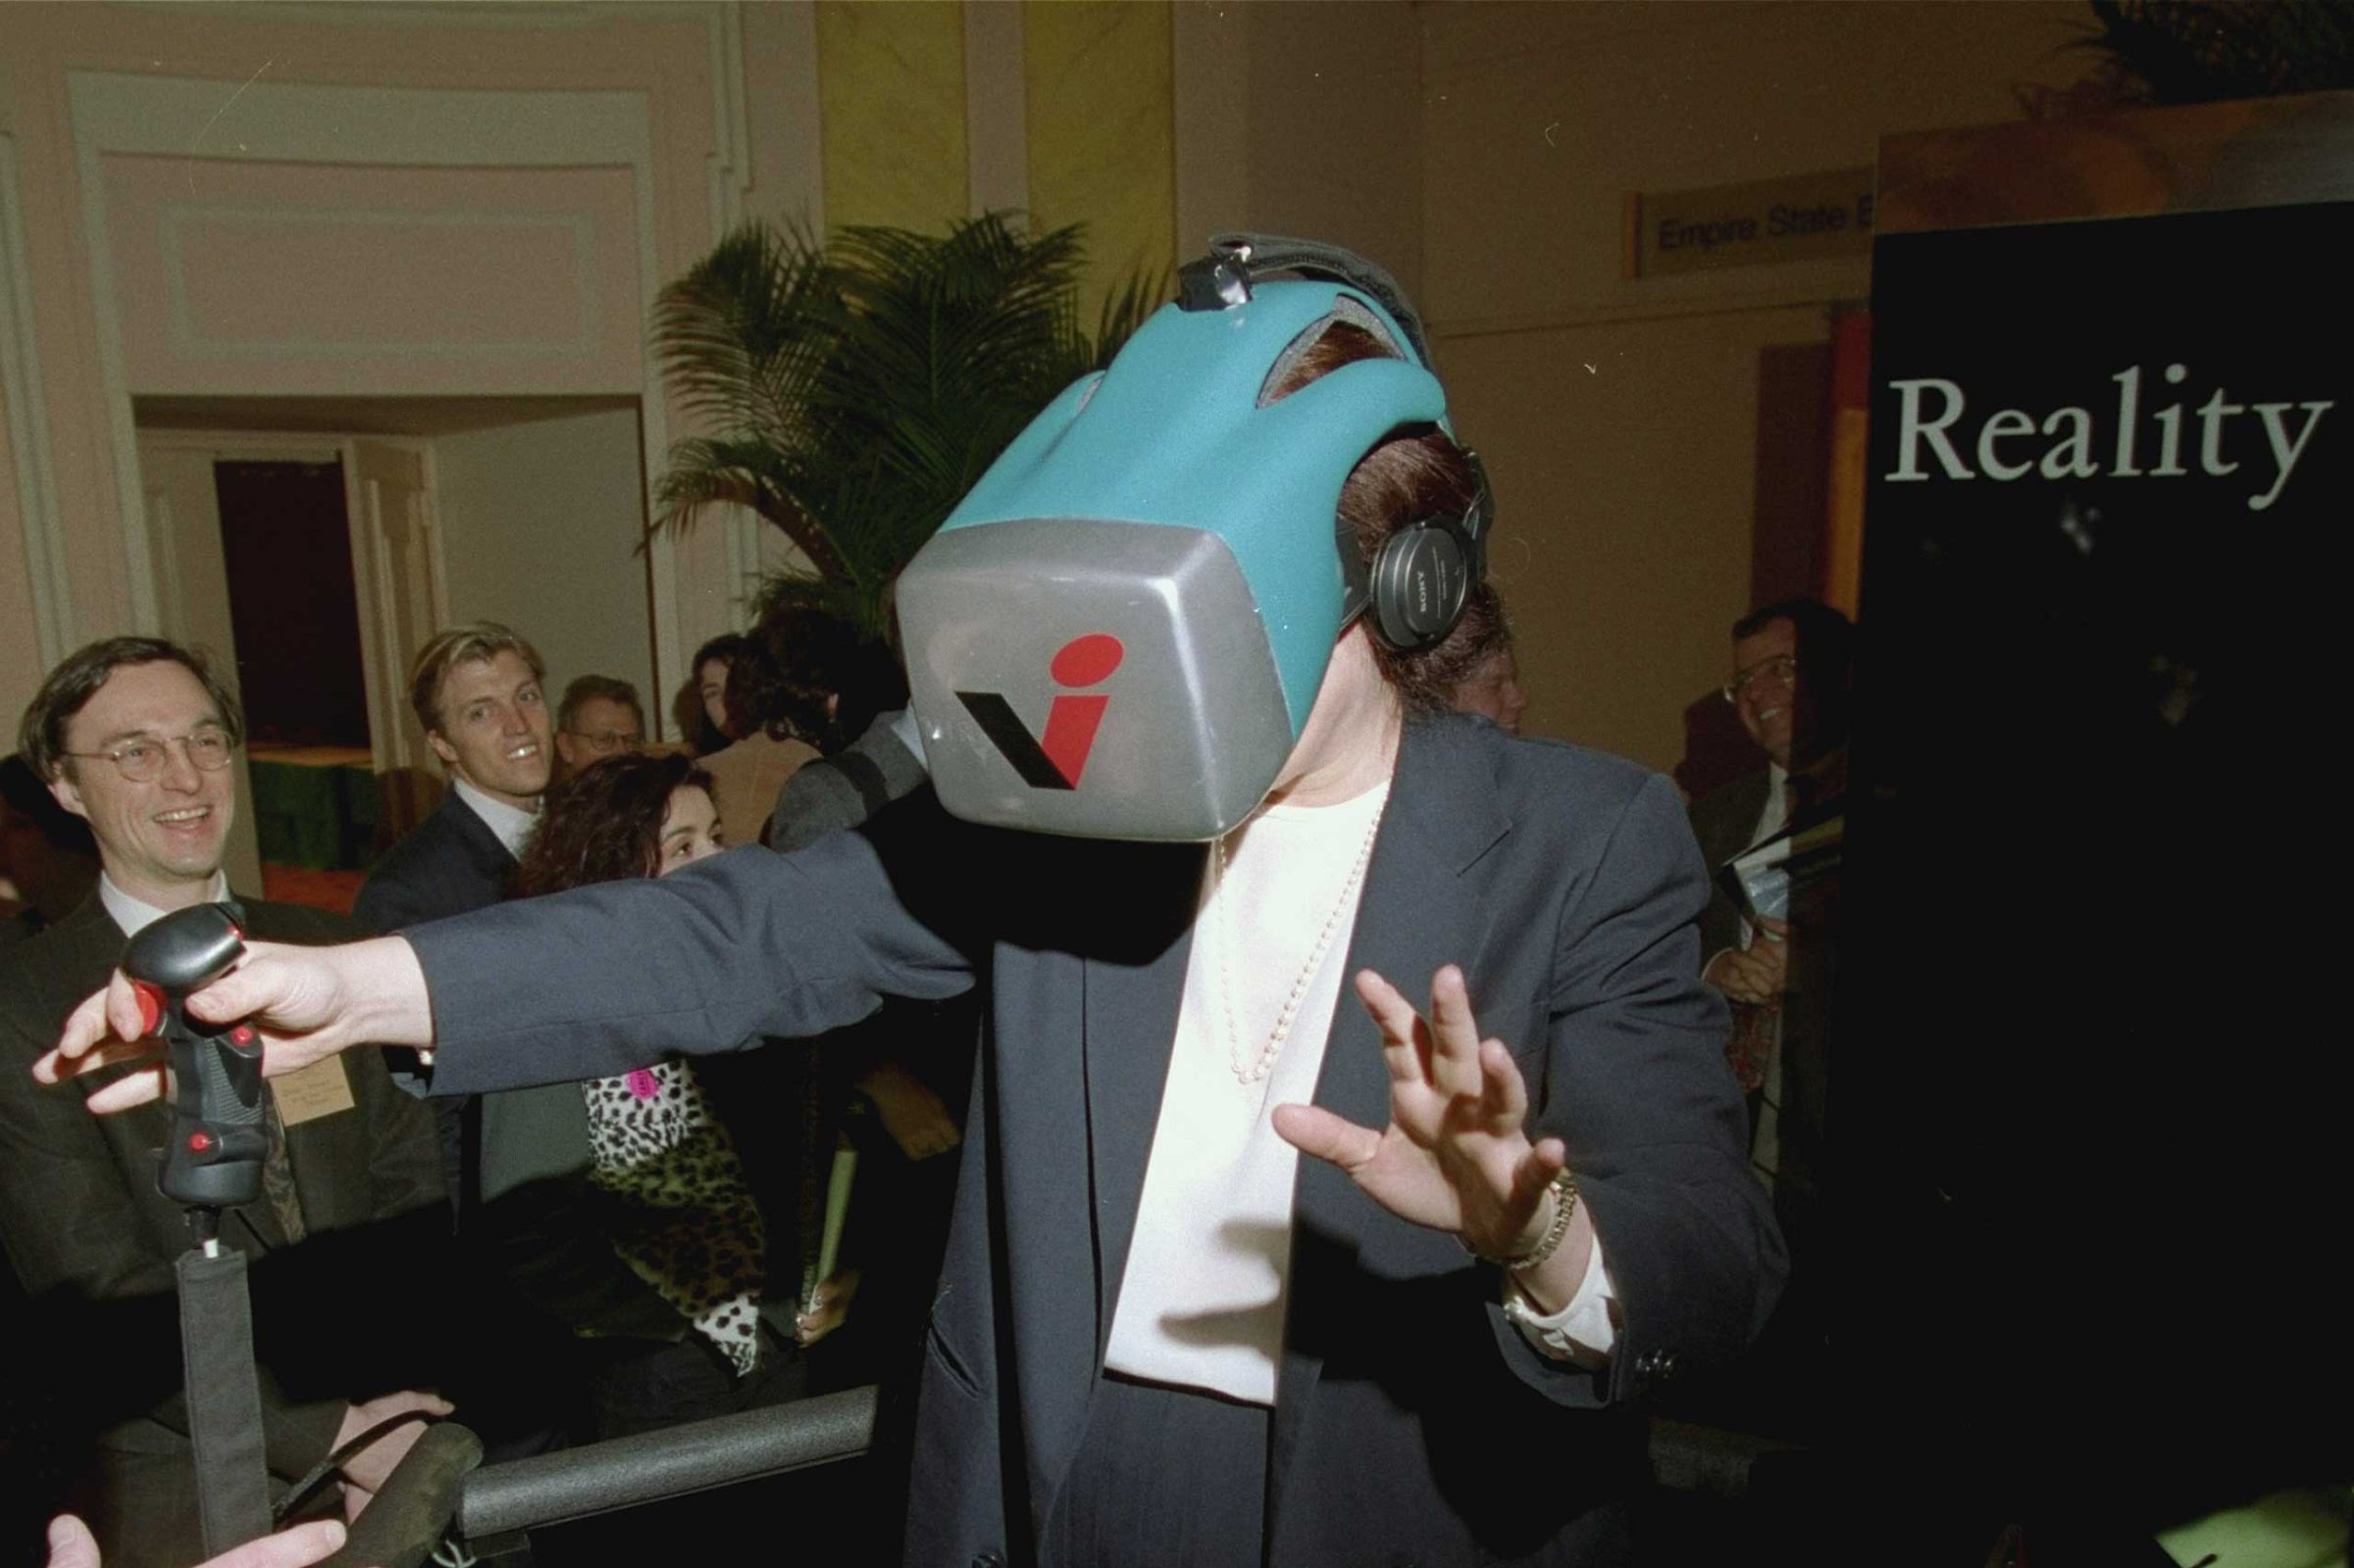 An electronic helmet and a large joystick during a demonstration of "Reality +" at the Virtual Reality Systems 93 show in New York on March 16, 1993.